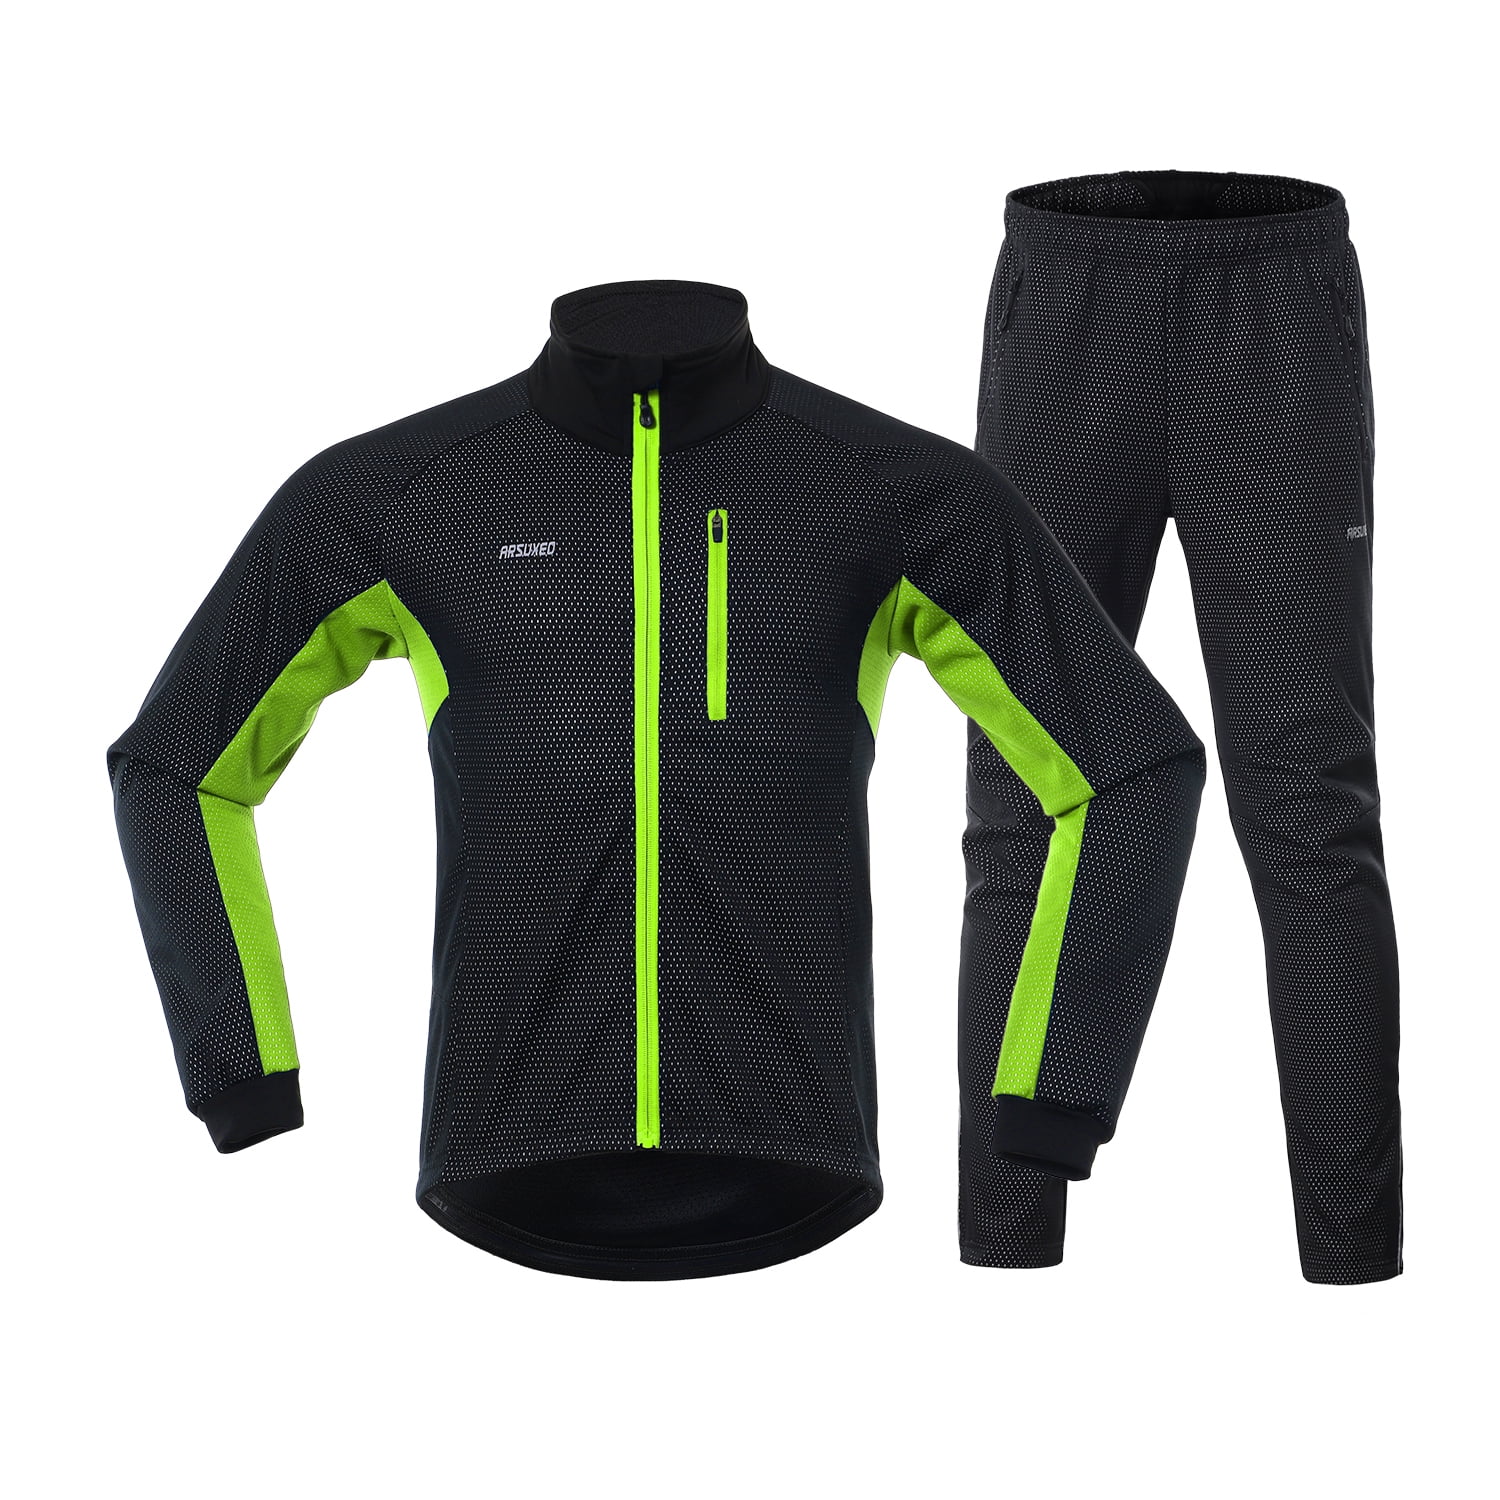 Arsuxeo - Men Winter Cycling Clothing 